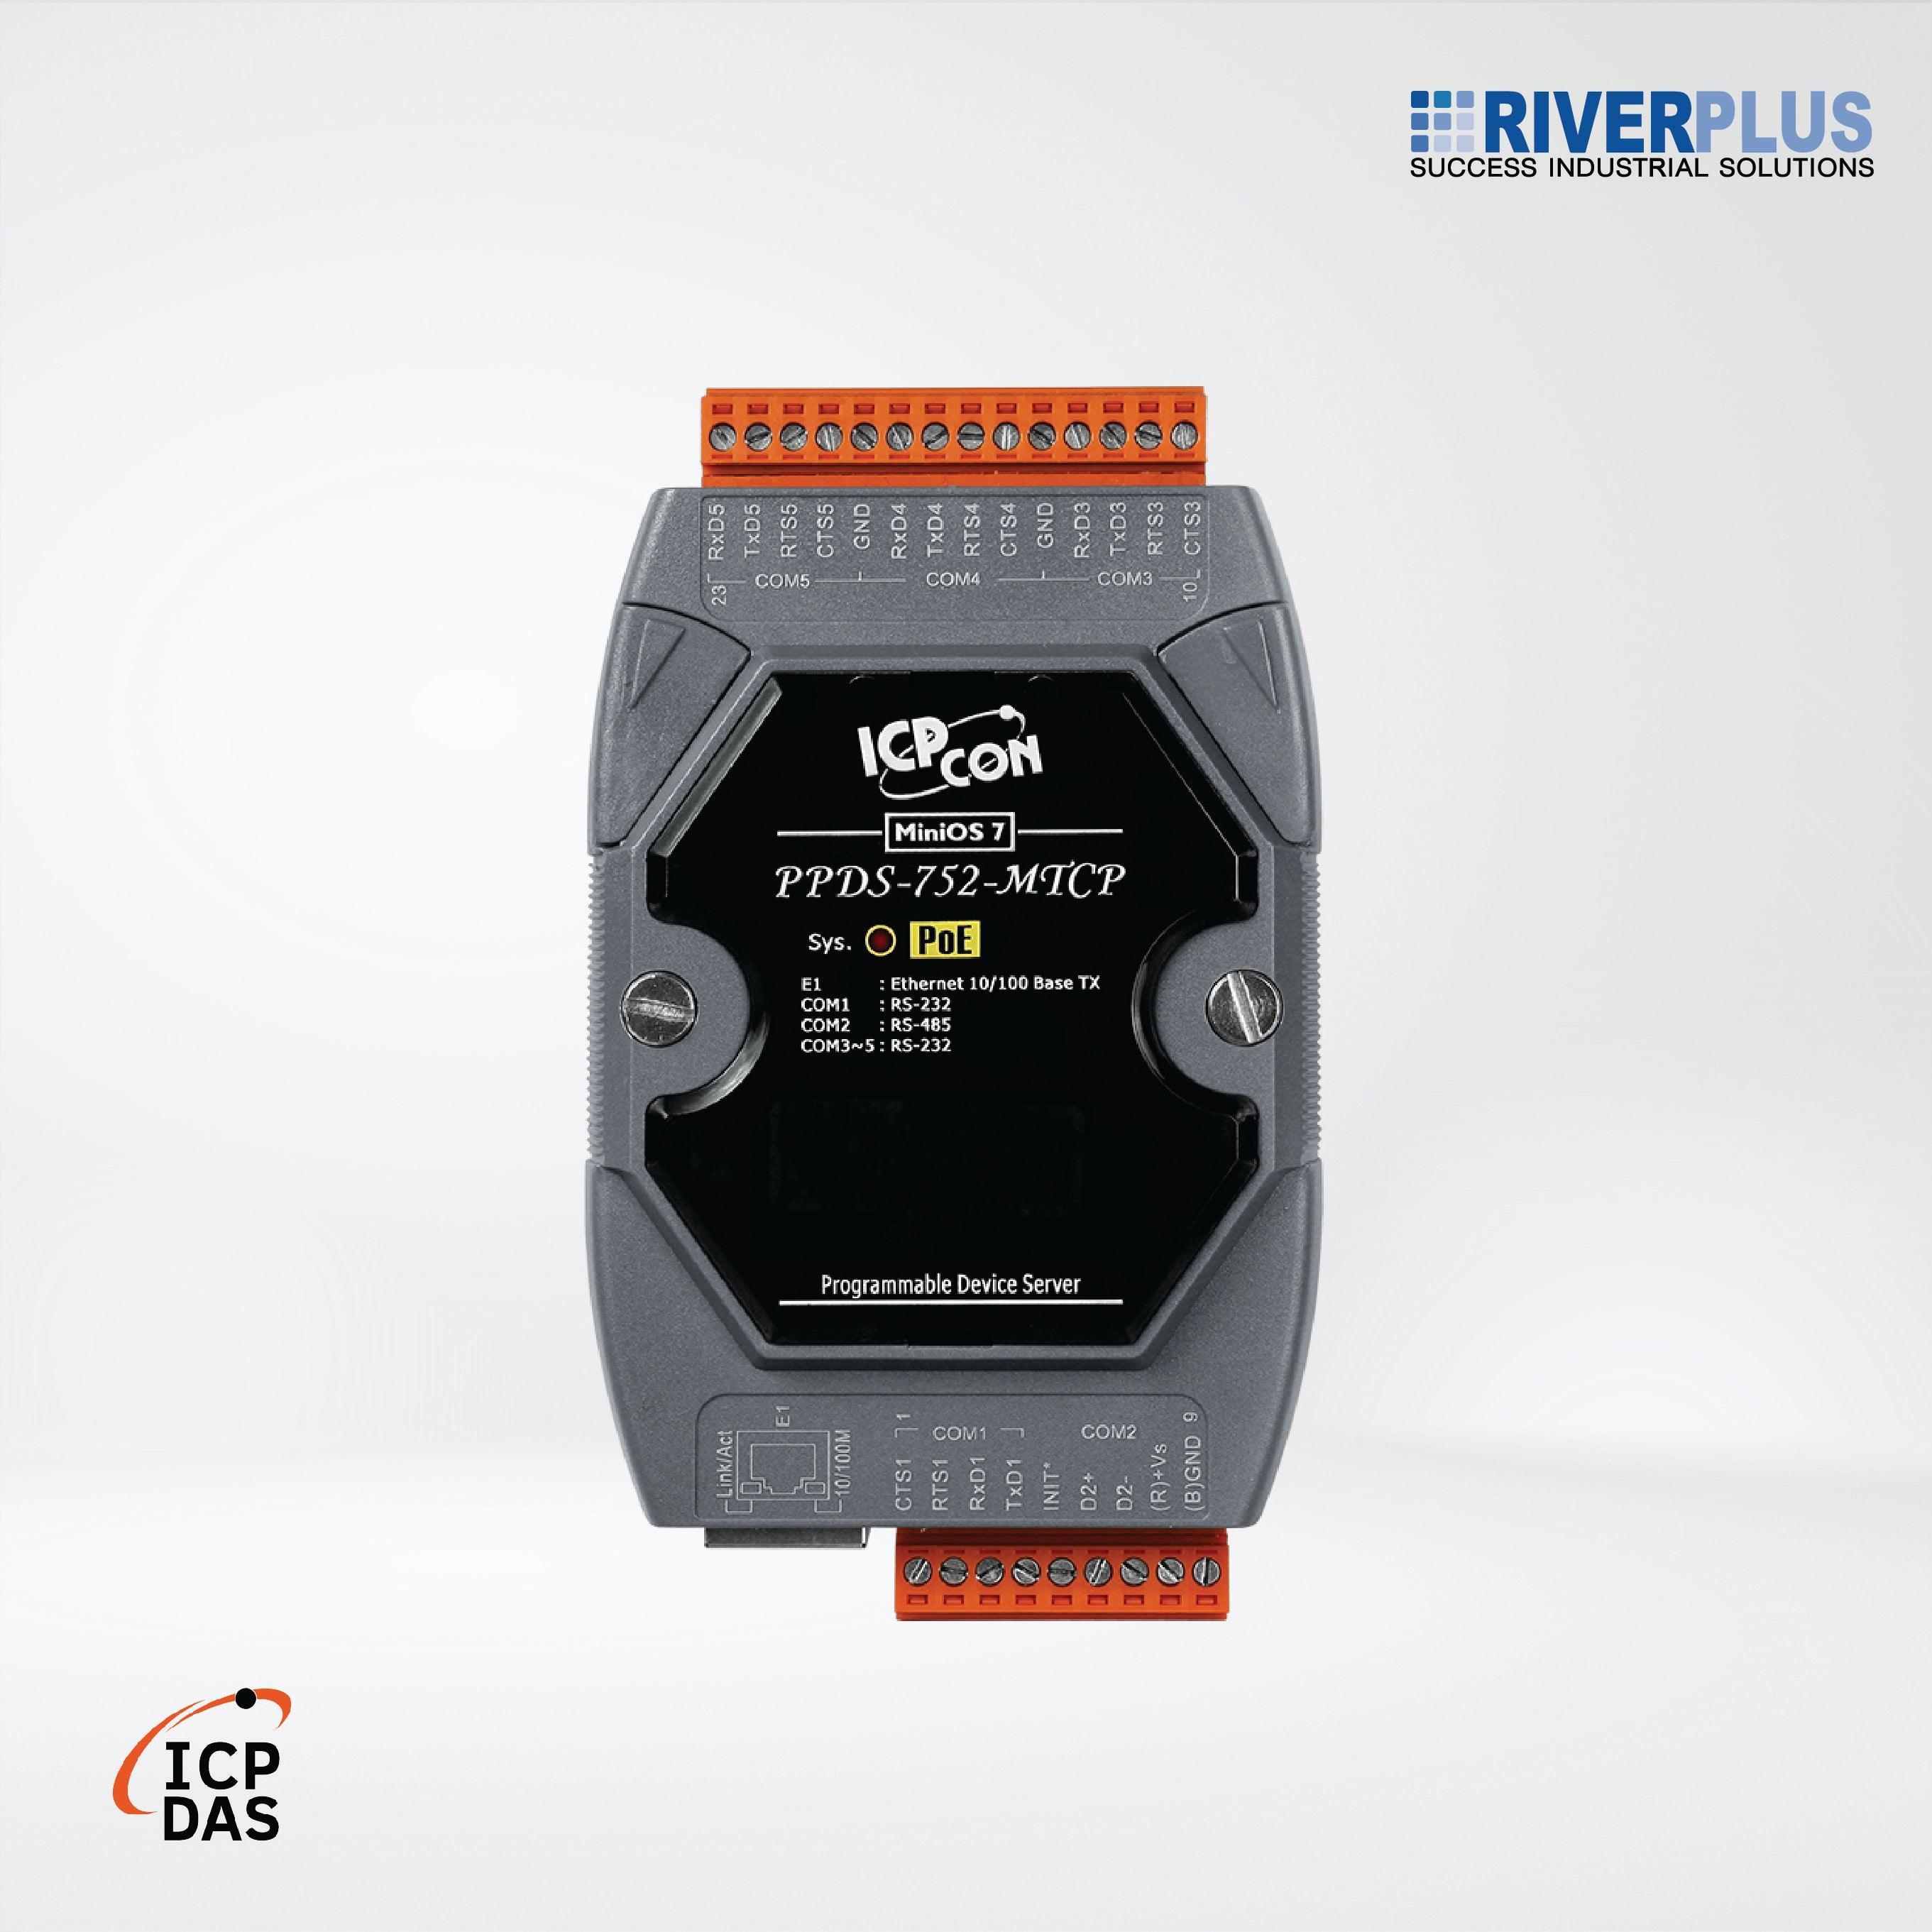 PPDS-752-MTCP Programmable (4x RS-232 and 1x RS-485) Serial-to-Ethernet Device Server - Riverplus